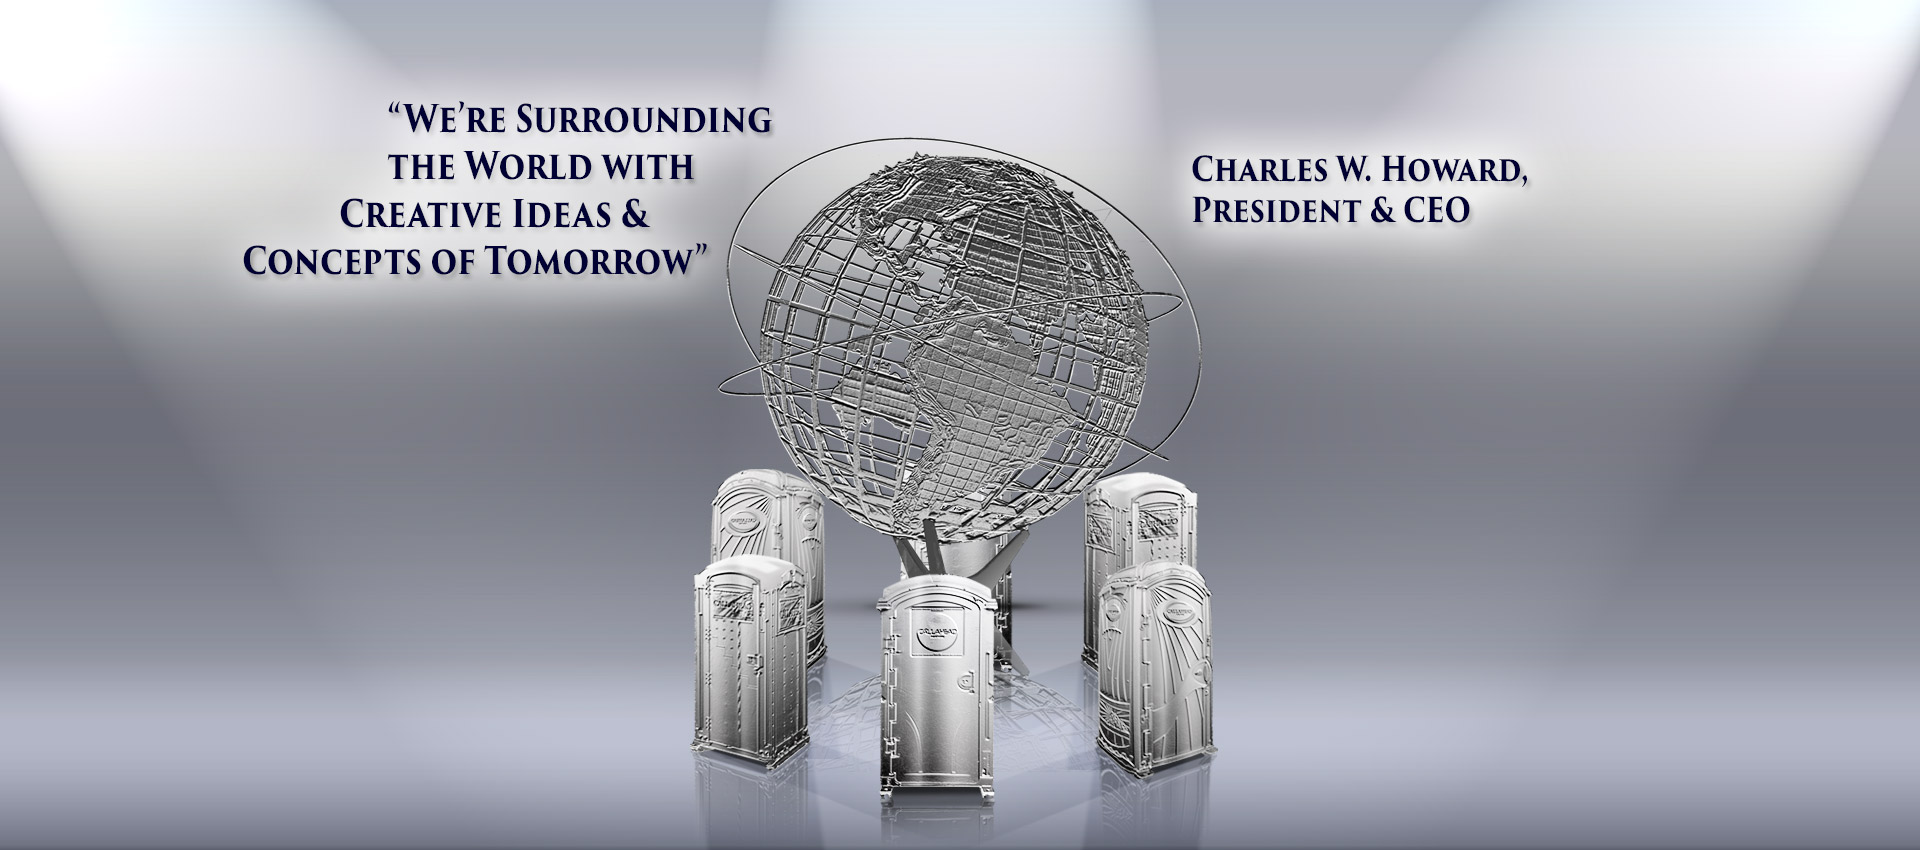 We're Surrounding The World With Creative Ideas & Concepts of Tomorrow - Charles W. Howard, President and CEO